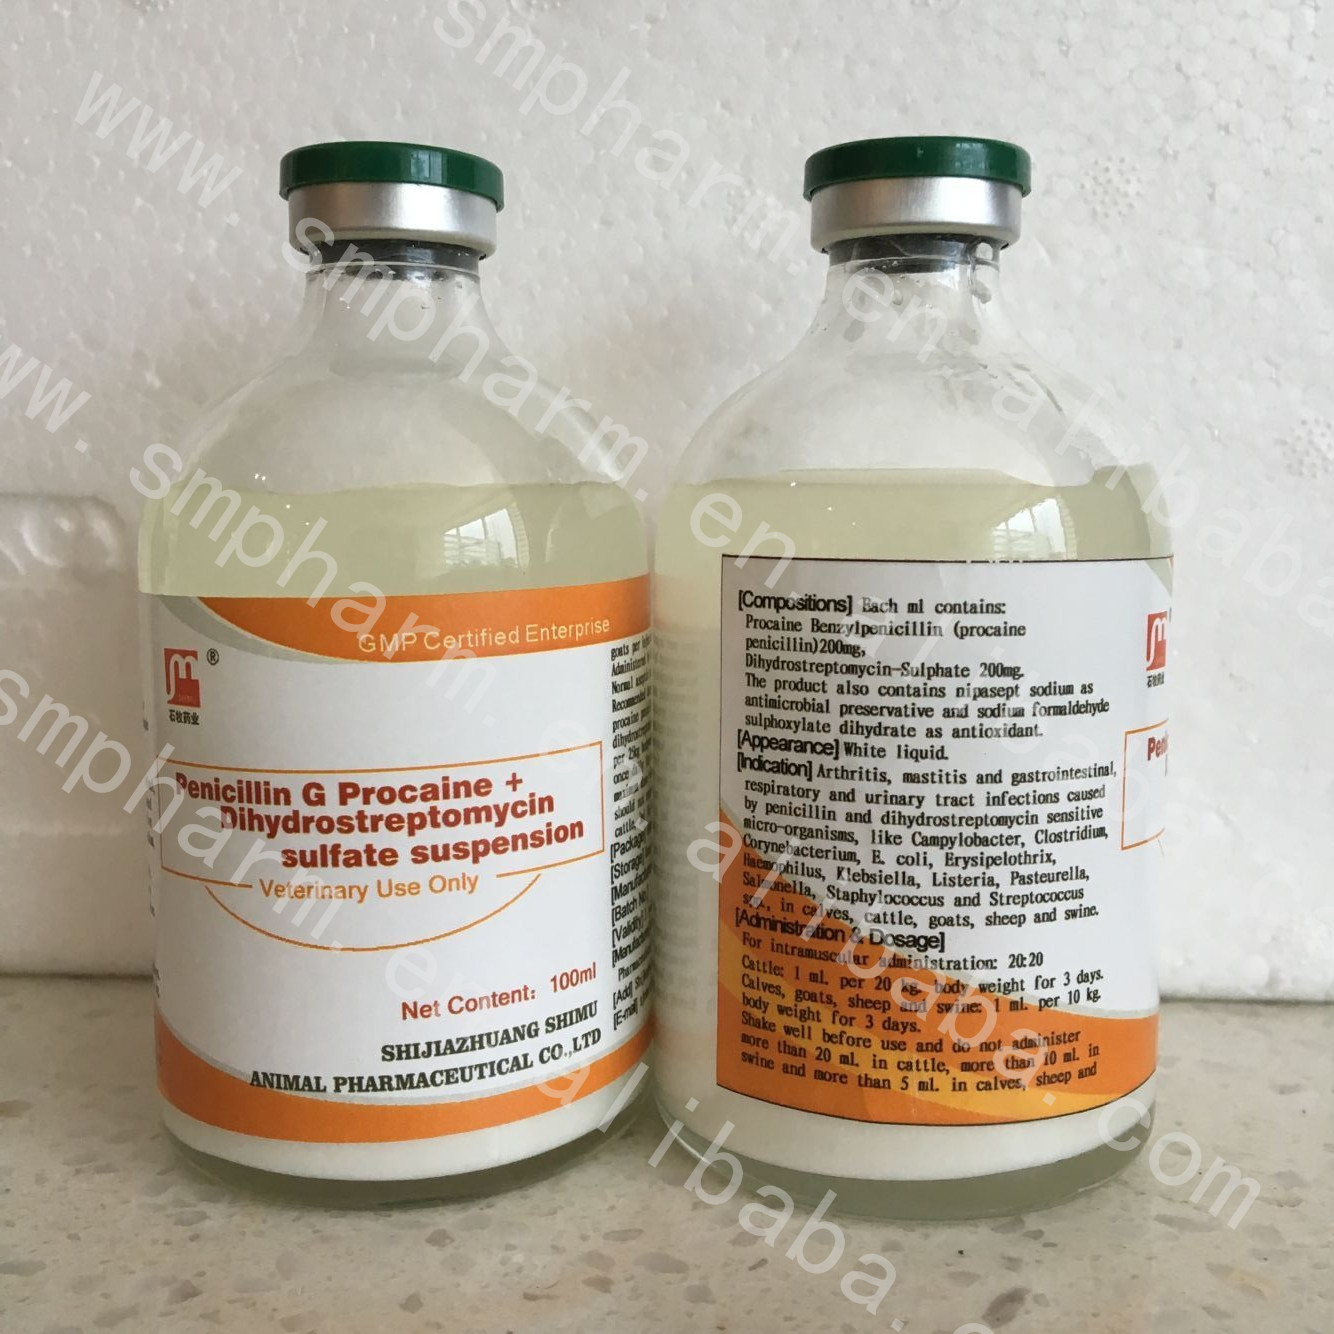 Procaine Penicillin G and Dihydrostreptomycin Sulfate Suspension injectable drugs for animal Antimicrobials